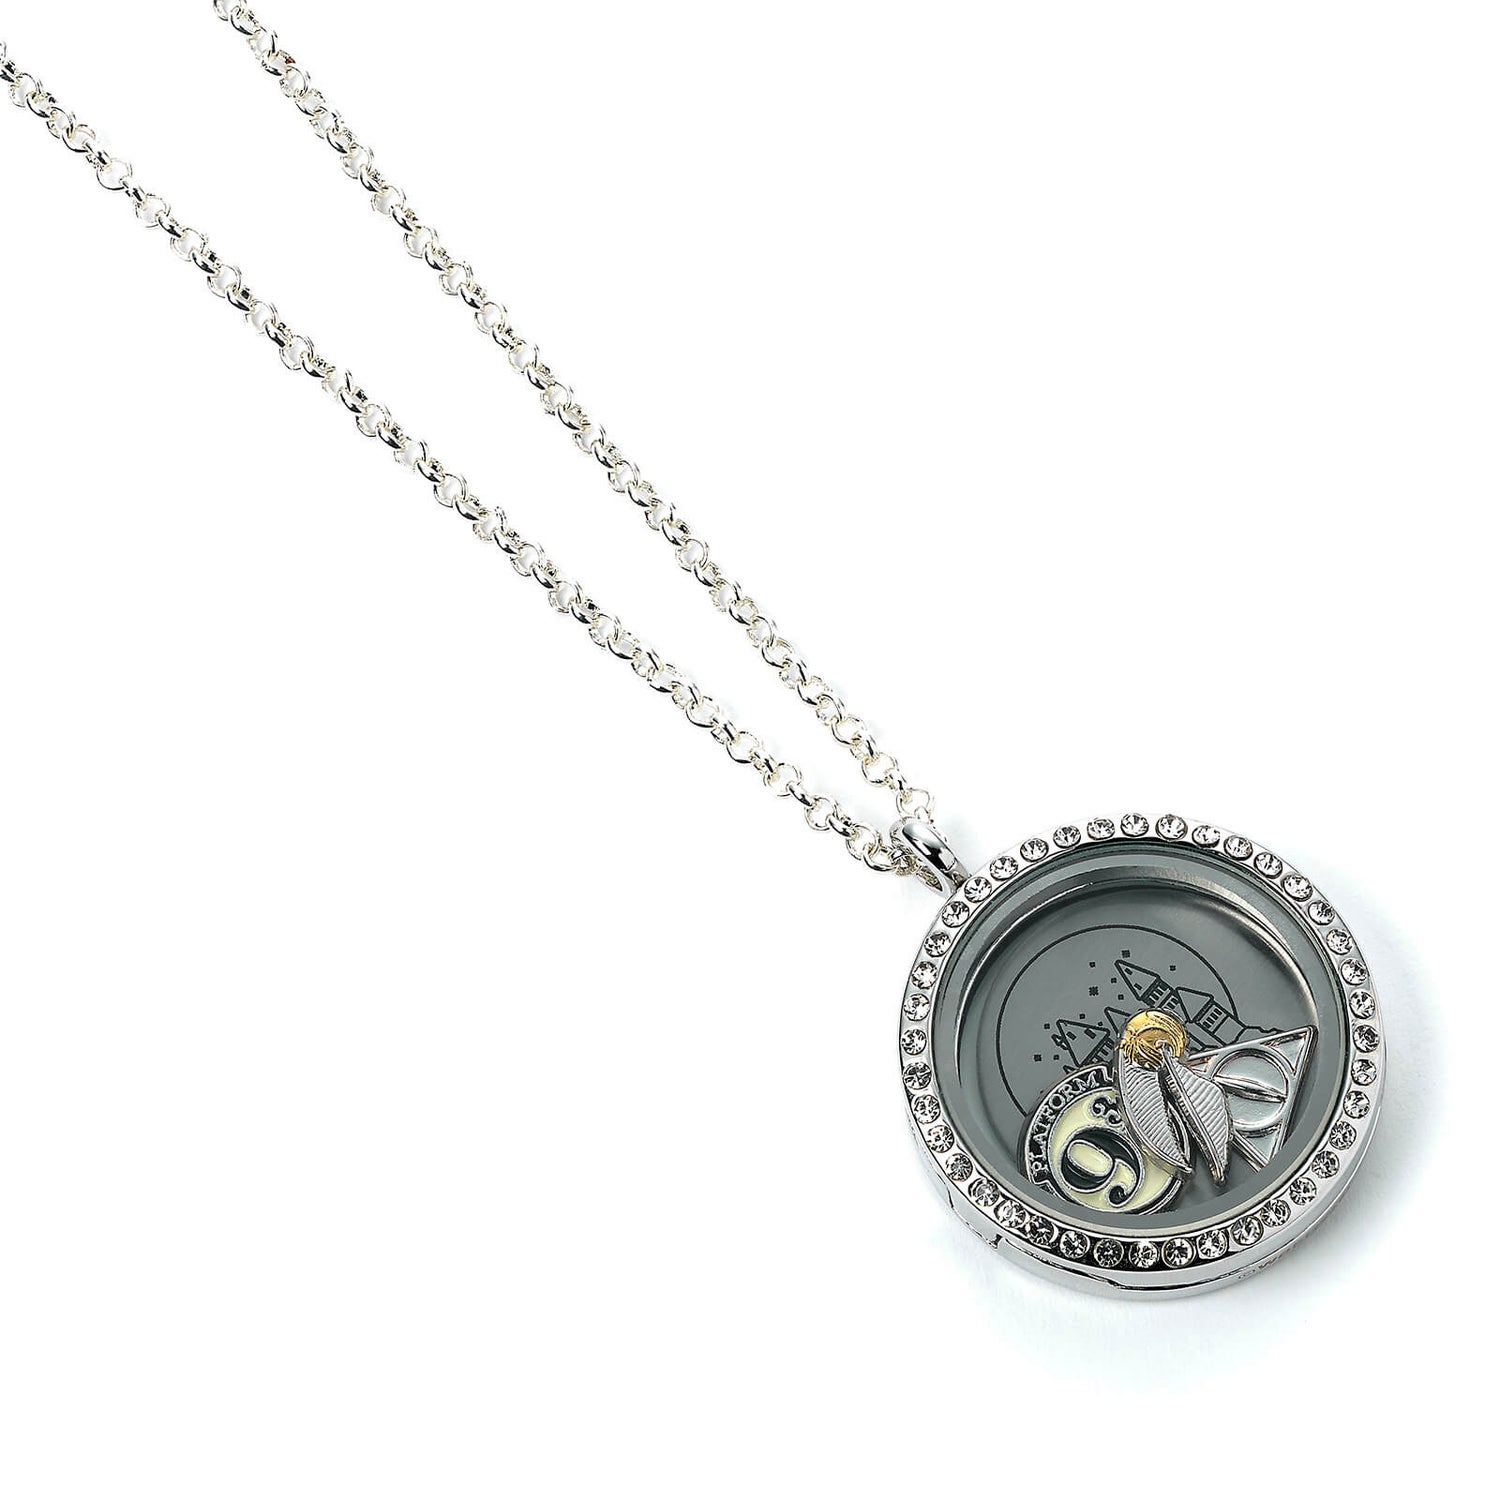 Harry Potter Floating Charm Locket Necklace with 3 charms - Silver